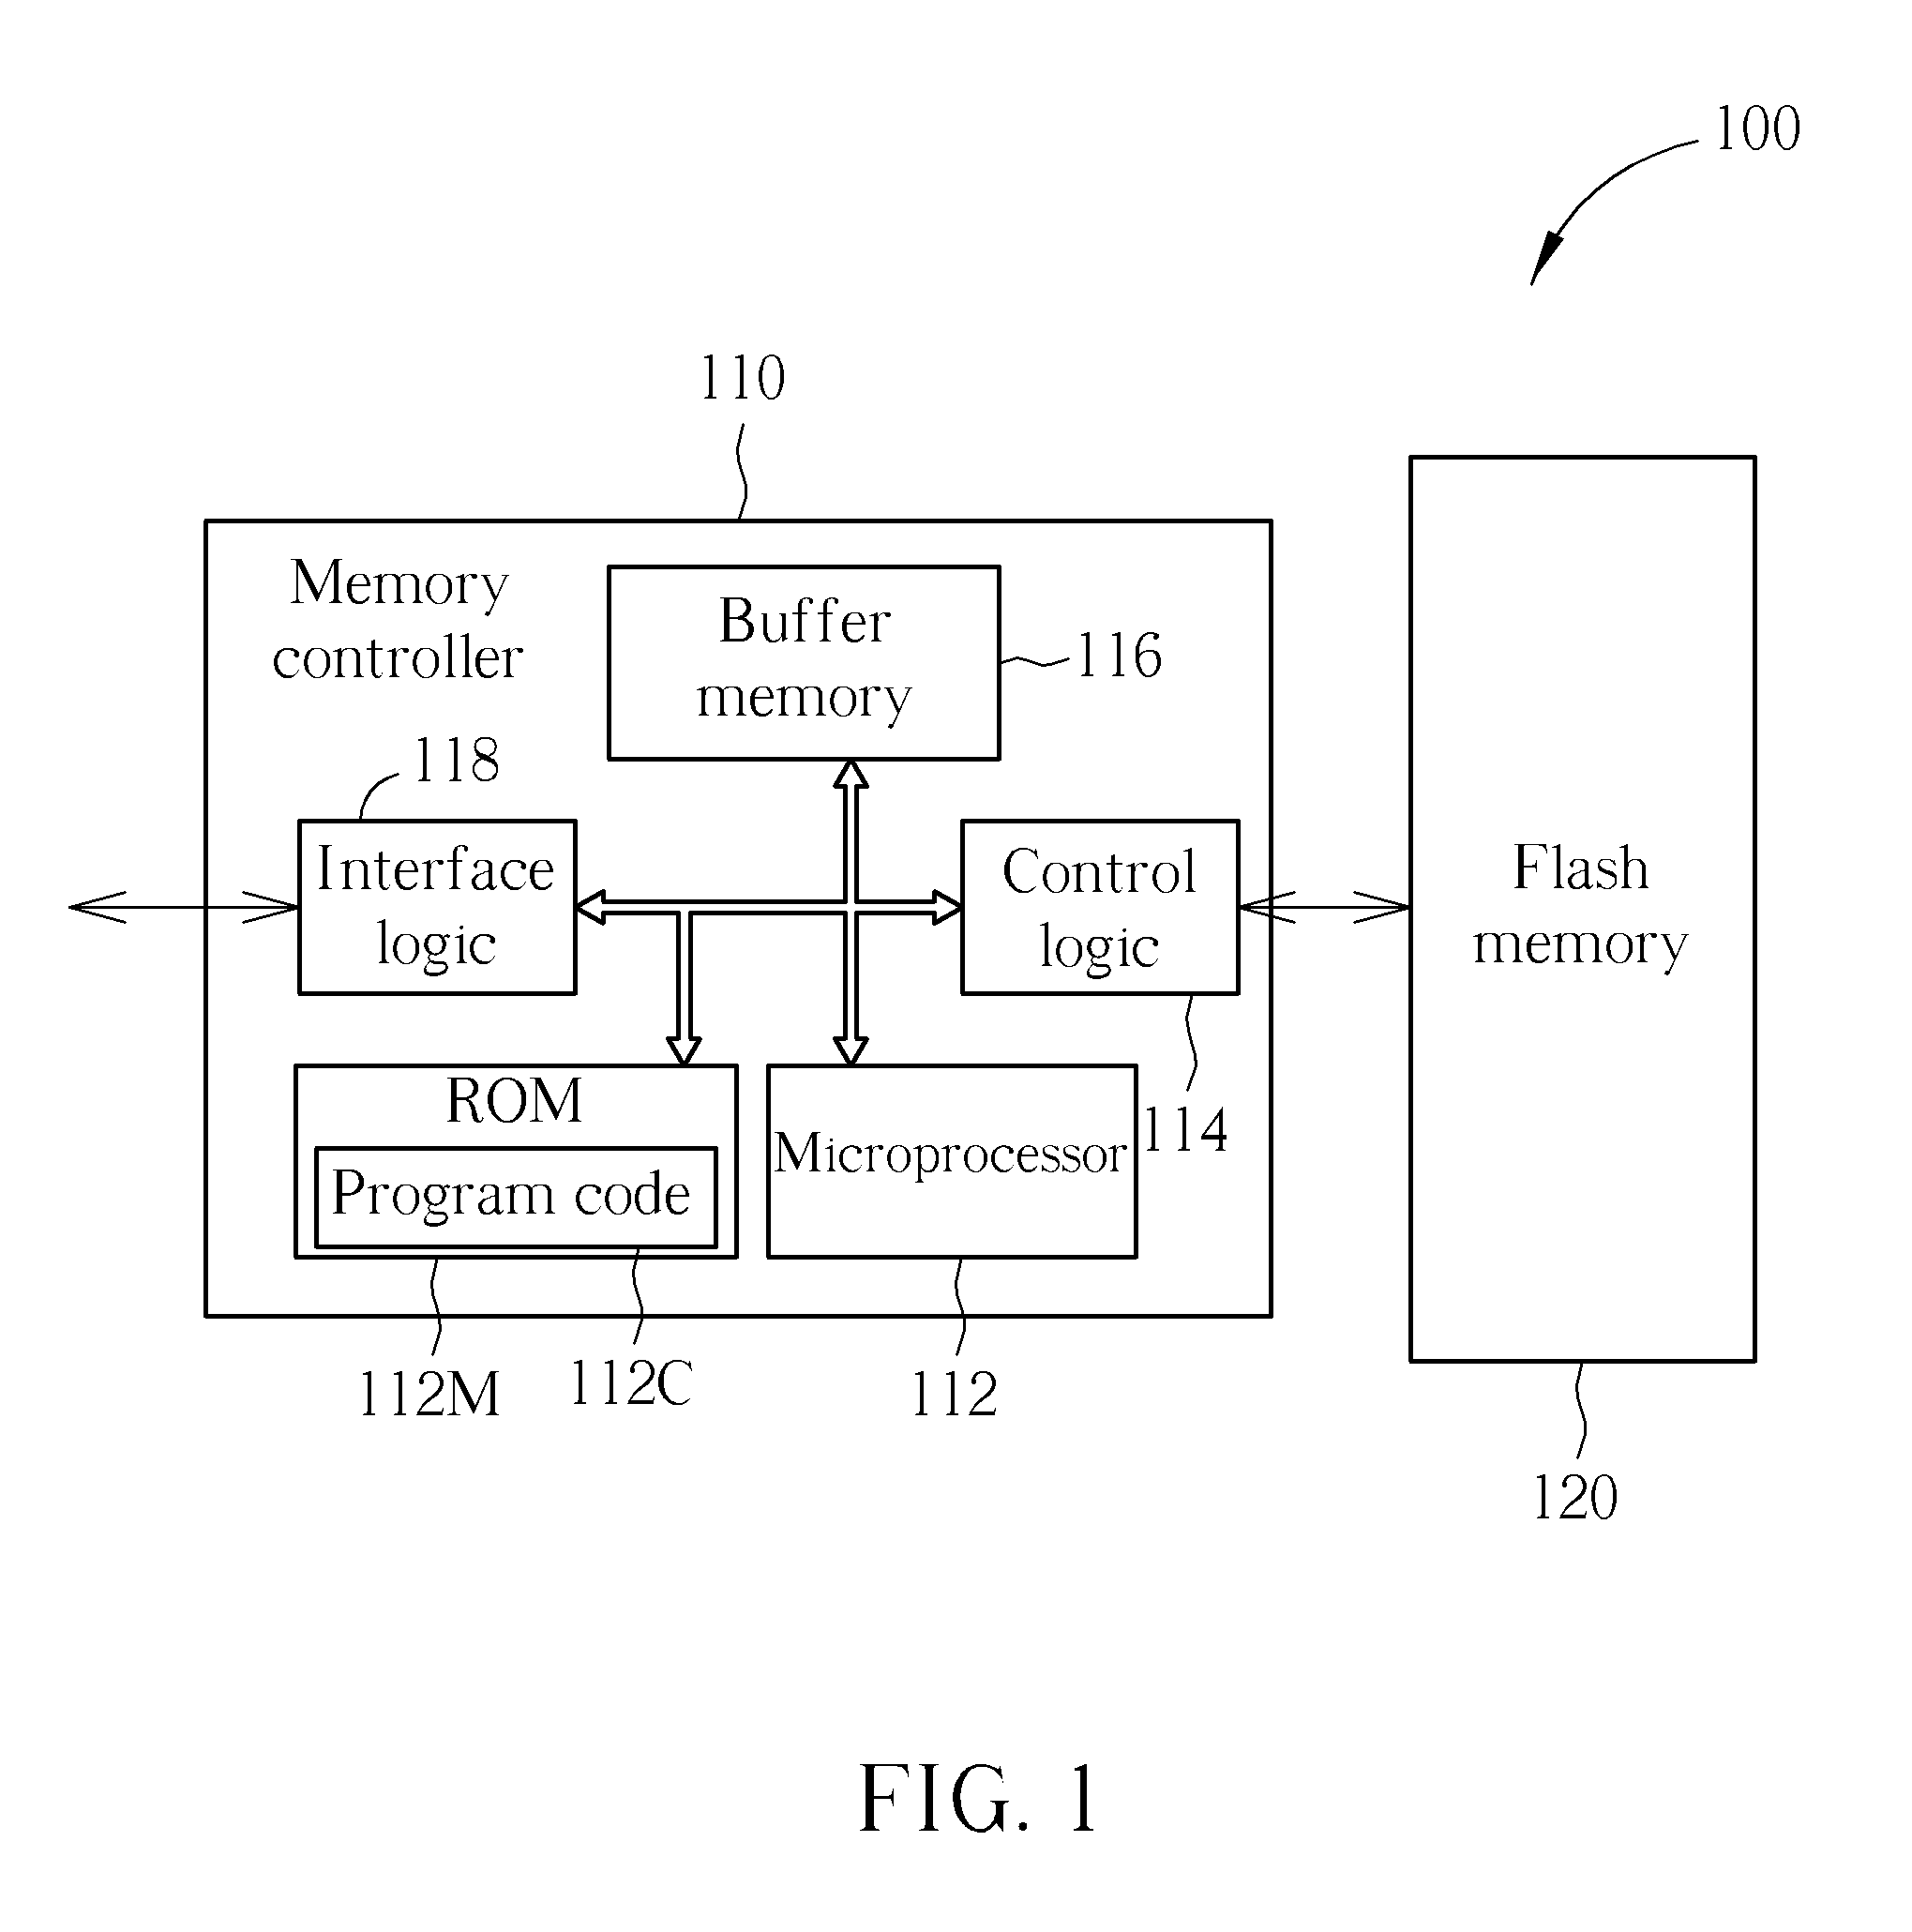 Method for establishing a communication channel between a host device and a memory device, associated memory device and controller thereof, and associated host device and host device application